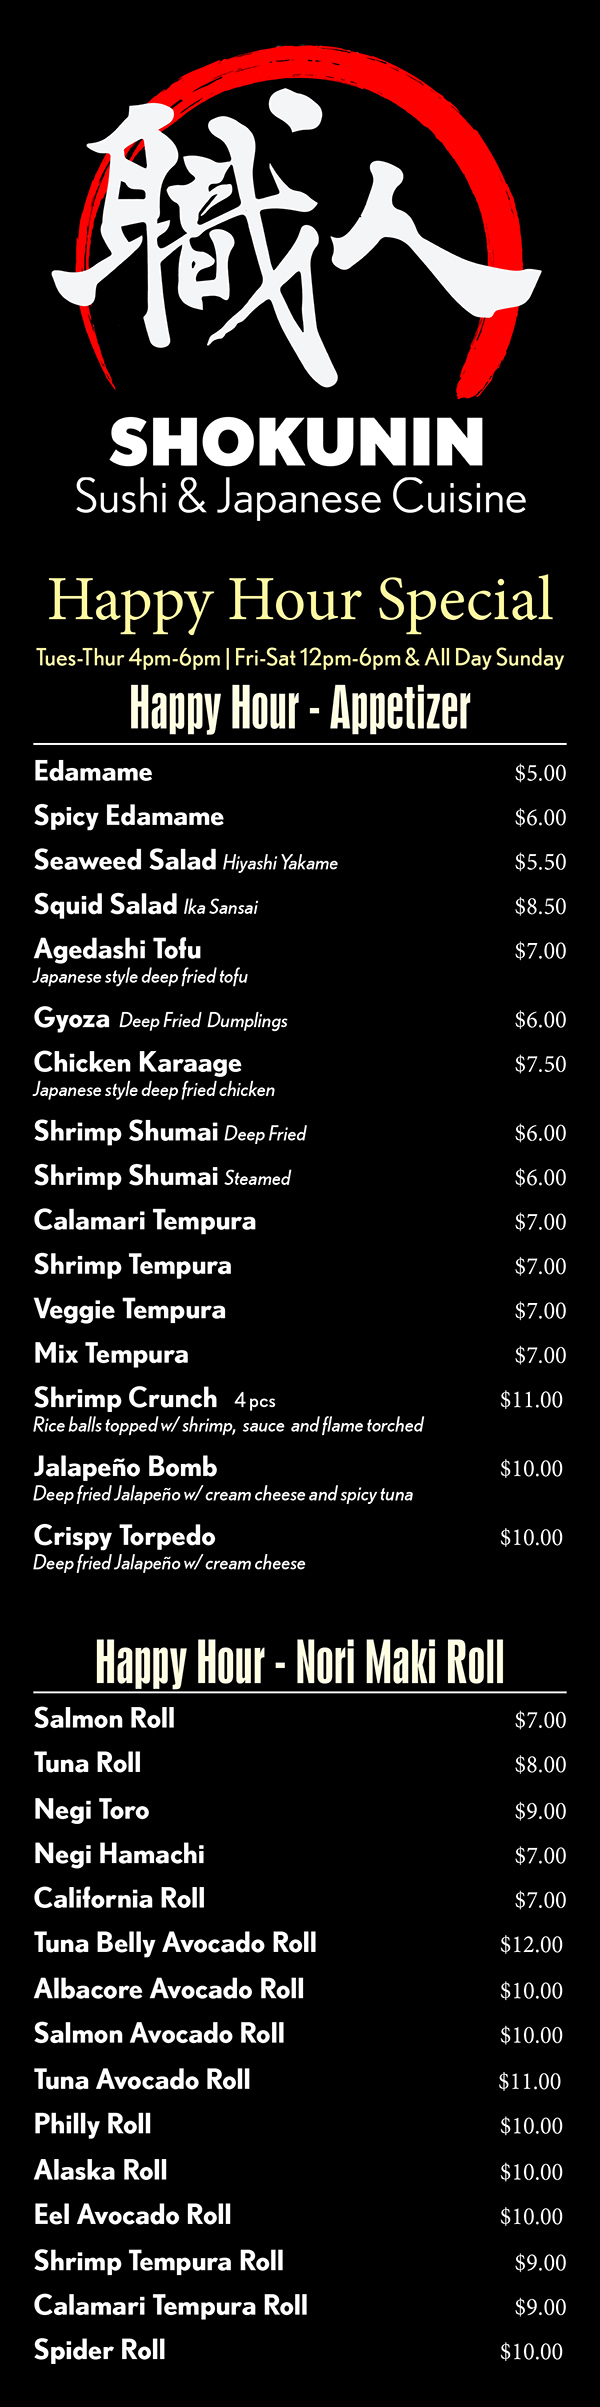 Happy Hour Special Rolls
Happy hour runs Monday - Saturday:  11am - 6pm 
& All day Sunday
Nori Maki Rolls
Salmon Roll 					  $5
Tuna Roll 					  $5
Negi Toro 					  $7
Negi Hamachi				  $5
California Roll				  $5
Tuna Belly Avocado Roll		  $7
Albacore Avocado Roll 		  $6
Salmon Avocado Roll		  $6
Tuna Avocado Roll 			  $6
Philly Roll 					  $6
Alaska Roll 					  $6
Eel Avocado Roll 			  $6
Shrimp Tempura Roll		  $7
Calamari Tempura Roll		  $7
Spider Roll 					  $7
Spicy Rolls
Spicy Tuna Roll				  $6
Spicy California Roll			  $6
Spicy Albacore Roll			  $6
Spicy Salmon Roll			  $6
Spicy Toro Roll				  $8
Spicy Crab Roll				  $6
Spicy Shrimp Tempura Roll	  $7
Spicy Calamari Tempura Roll	  $7
Spicy Cooked Salmon Roll	  $6
Red Light			  		$9.5
       spicy tuna roll w/ spicy yellowtail and crunch on top
Kill Bill Roll			  		$9.5
       shrimp tempura roll w/ spicy crab, serrano pepper on top
Go! Red				  		$9.5
       shrimp temoura roll w/ spicy tuna on top
Kiss of Fire			  		$9.5
       spicy crab roll w/ spicy tuna & serrano pepper on top
Shokunin Spicy Toro Tartar	$12
       spicy tuna toll w/ toro
Deep Fried Rolls
Golden Cali					  $8
Vegas    salmon, avocado and cream cheese	  $8
Spicy Crab Tempura	  		  $8
Veggie Tempura				  $7
Special Nori Maki Rolls
Caterpillar Roll				$9.5
       eel, cucumber w/ avocado on top
Rainbow Roll				$9.5
       four different fish w/ avocado on cali roll
Dragon Roll					$9.5
       eel & avovado on cali roll
Tuna Lover					$9.5
       tuna, crab, cucumber, avocado w/ tuna on top
Salmon Lover				$9.5
       salmon, crab, cucumber, avocado w/ salmon on top
Shrimp Lover				$9.5
       deep fried shrimp, crab, cucum, avocado w/ shrimp on top
Pink Lady					$9.5
       crab, avocado, cucumber w/ seared salmon on top
M.T. Fuji 					$11
       deep fried shrimp, cucumber, crab w/ mashed avocado
Baby Scallop Tempura		$9.5
       cali roll w/ deep fried bay scallop on top
Big Mouth					$11
       deep fried shrimp, tuna, salmon, white fish, avo, cucum & crab
Tiger						$9.5
       shrimp and avocado on top of cali roll
Shrimp & Albacore			$9.5
       shrimp tempura roll w/ albacore on top
Husker Fever				$9.5
       deep fried shrimp, spicy crab w/ cooked spicy salmon on top
Ocean 3 Roll				$9.5
       deep fried shrimp, spicy crab, cucum w/ crab & deep fried bass
Oh Yes!						$9.5
       spicy crab, cucumber w/ avocado, shrimp & albacore on top
Koi							$9.5
       deep fried shrimp, spicy crab, cucumber, w/crab & deep fried bass 
White Fish Tempura			   $7
       deep fried white fish, crab, avocado
Spicy White Fish Tempura	   $8
       deep fried white fish, spicy crab, avocado
Spicy Rolls
Cucumber Roll				  $4
Avocado Roll				  $4
Oshinko Roll pickeled radish		  $4
Shitake Mushroom Roll		  $4
AAC Roll asparagus, avocado & cucumber 	    $5
Sweet Potato Roll			  $5
Sweet Tofu Skin Roll			  $4
Veggie Delight				  $8
      oshinko, inari, cucum, asparagus w/ avocado top
Hand Rolls (Temaki)
$4
Spicy Tuna		Spicy Salmon
Spicy Yellowtail	Spicy Crab
California		Veggie
Negi Hama		Shrimp Tempura
Smoke Salmon	Eel & Avocado
Salmon & Avocado
Tuna & Avocado
$5
Spicy Scallop	Spicy Toro
Negi Toro

Food may contain MSG, eggs, soy, dairy, wheat and/or nuts.
Consuming raw or under-cooked meats, poultry, seafood, shellfish, or eggs may increase risk of food-borne illness.

Please alert us if you  have any special allergy concerns when ordering.
While we will try to accommodate special requests, neither Metro Dining Delivery or Shokunin are responsible for an individual’s allergic reaction to food or ingredients.